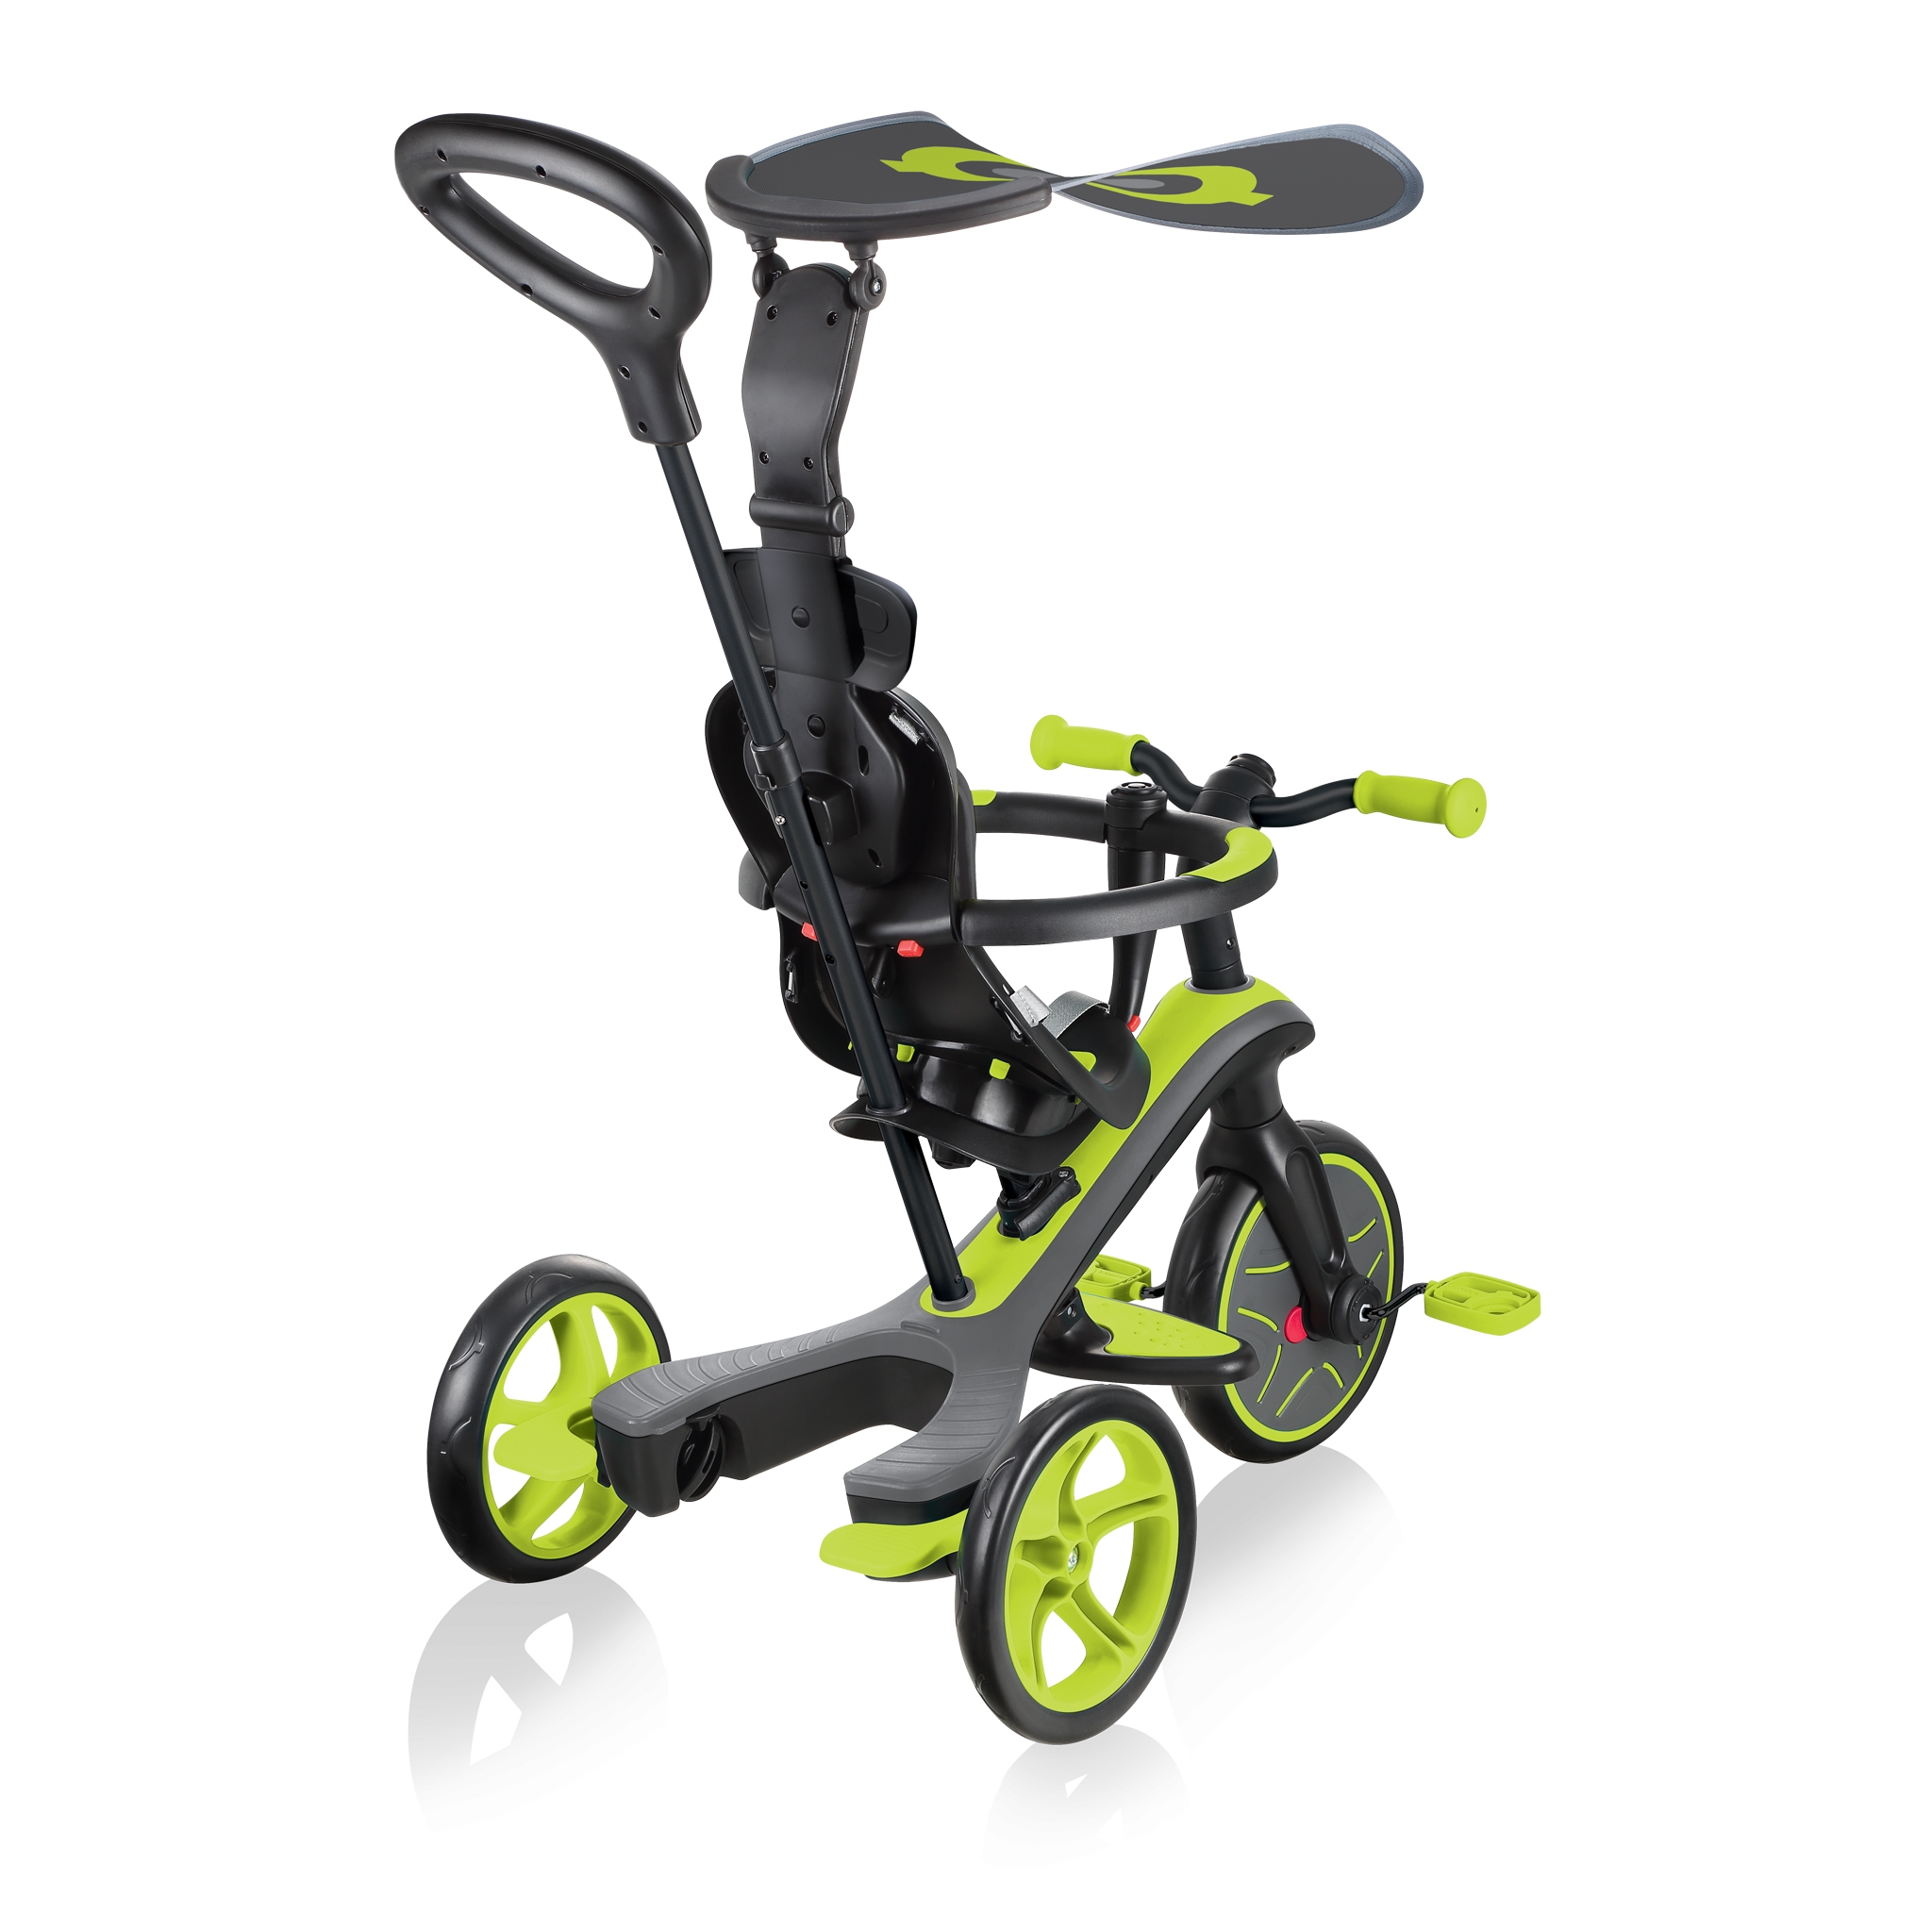 Globber-EXPLORER-TRIKE-4in1-all-in-one-baby-tricycle-and-kids-balance-bike-stage1-infant-trike 7